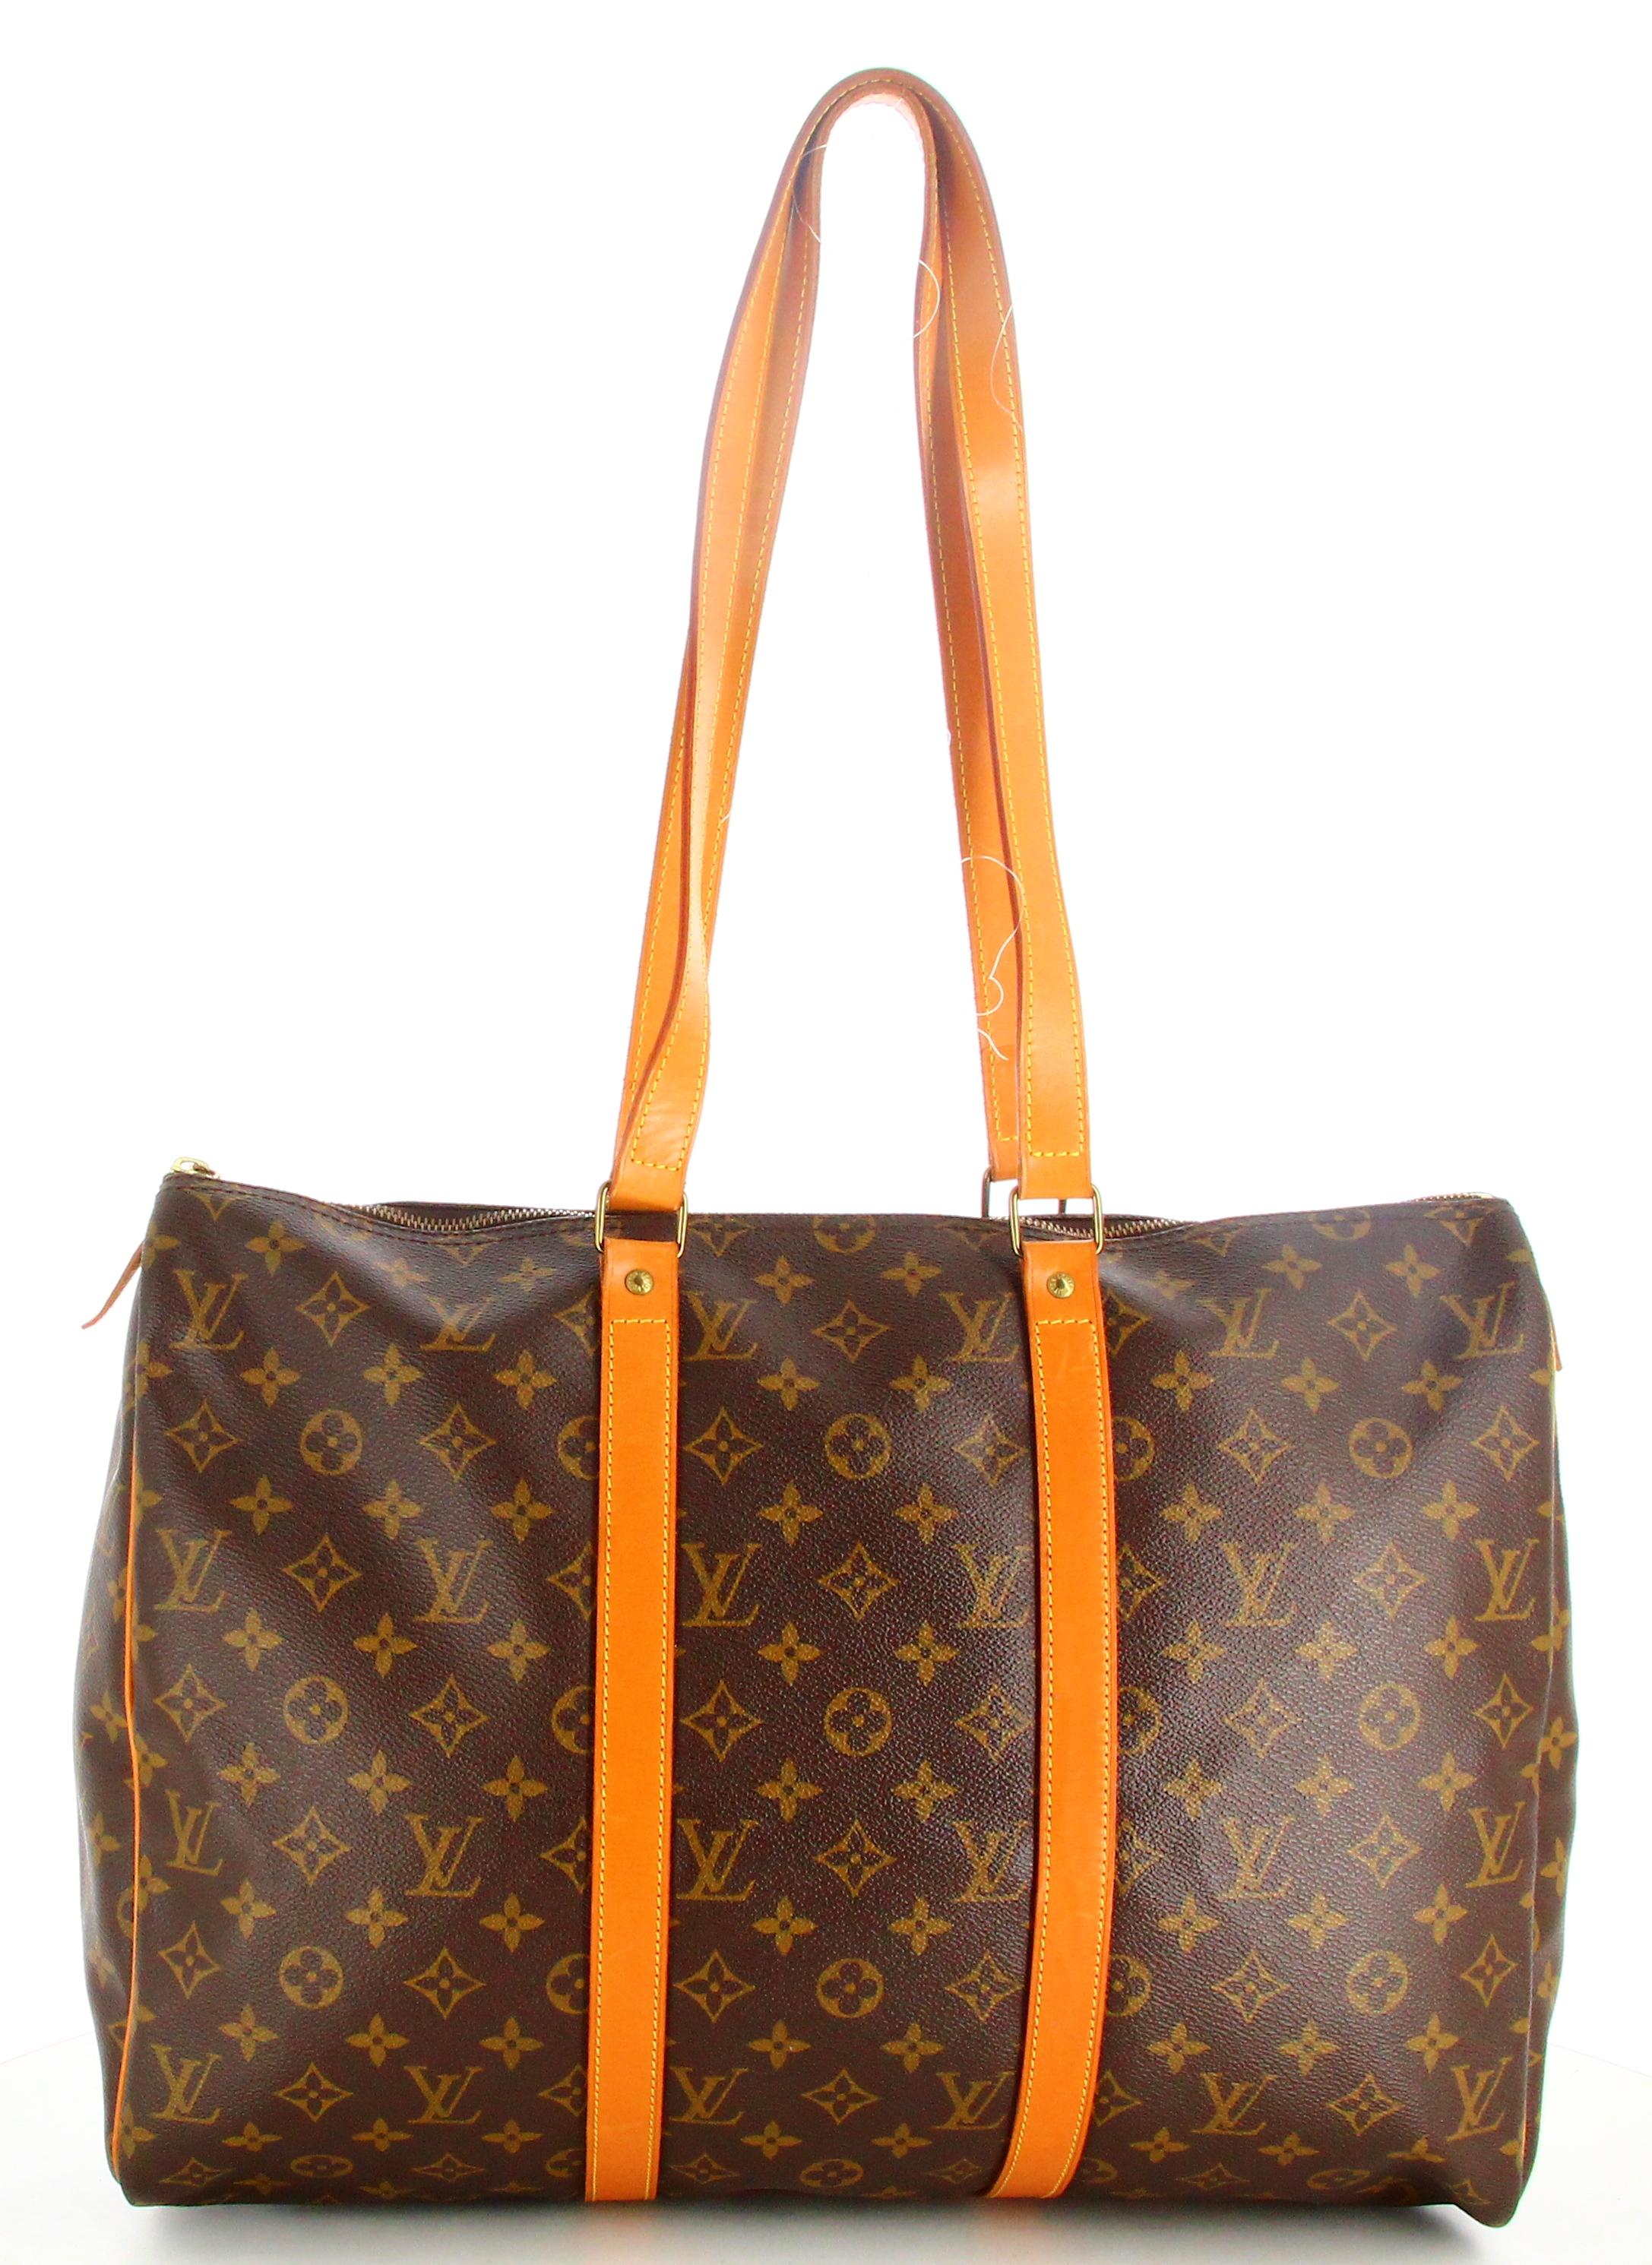 1992 Louis Vuitton Monogram Travel Bag Flannel Bag 45

- Very good condition. Shows very slight signs of wear over time.
- Louis vuitton travel bag 
- Monogram canvas
- Two brown leather handles 
- Zip : golden 
- Inside: brown canvas